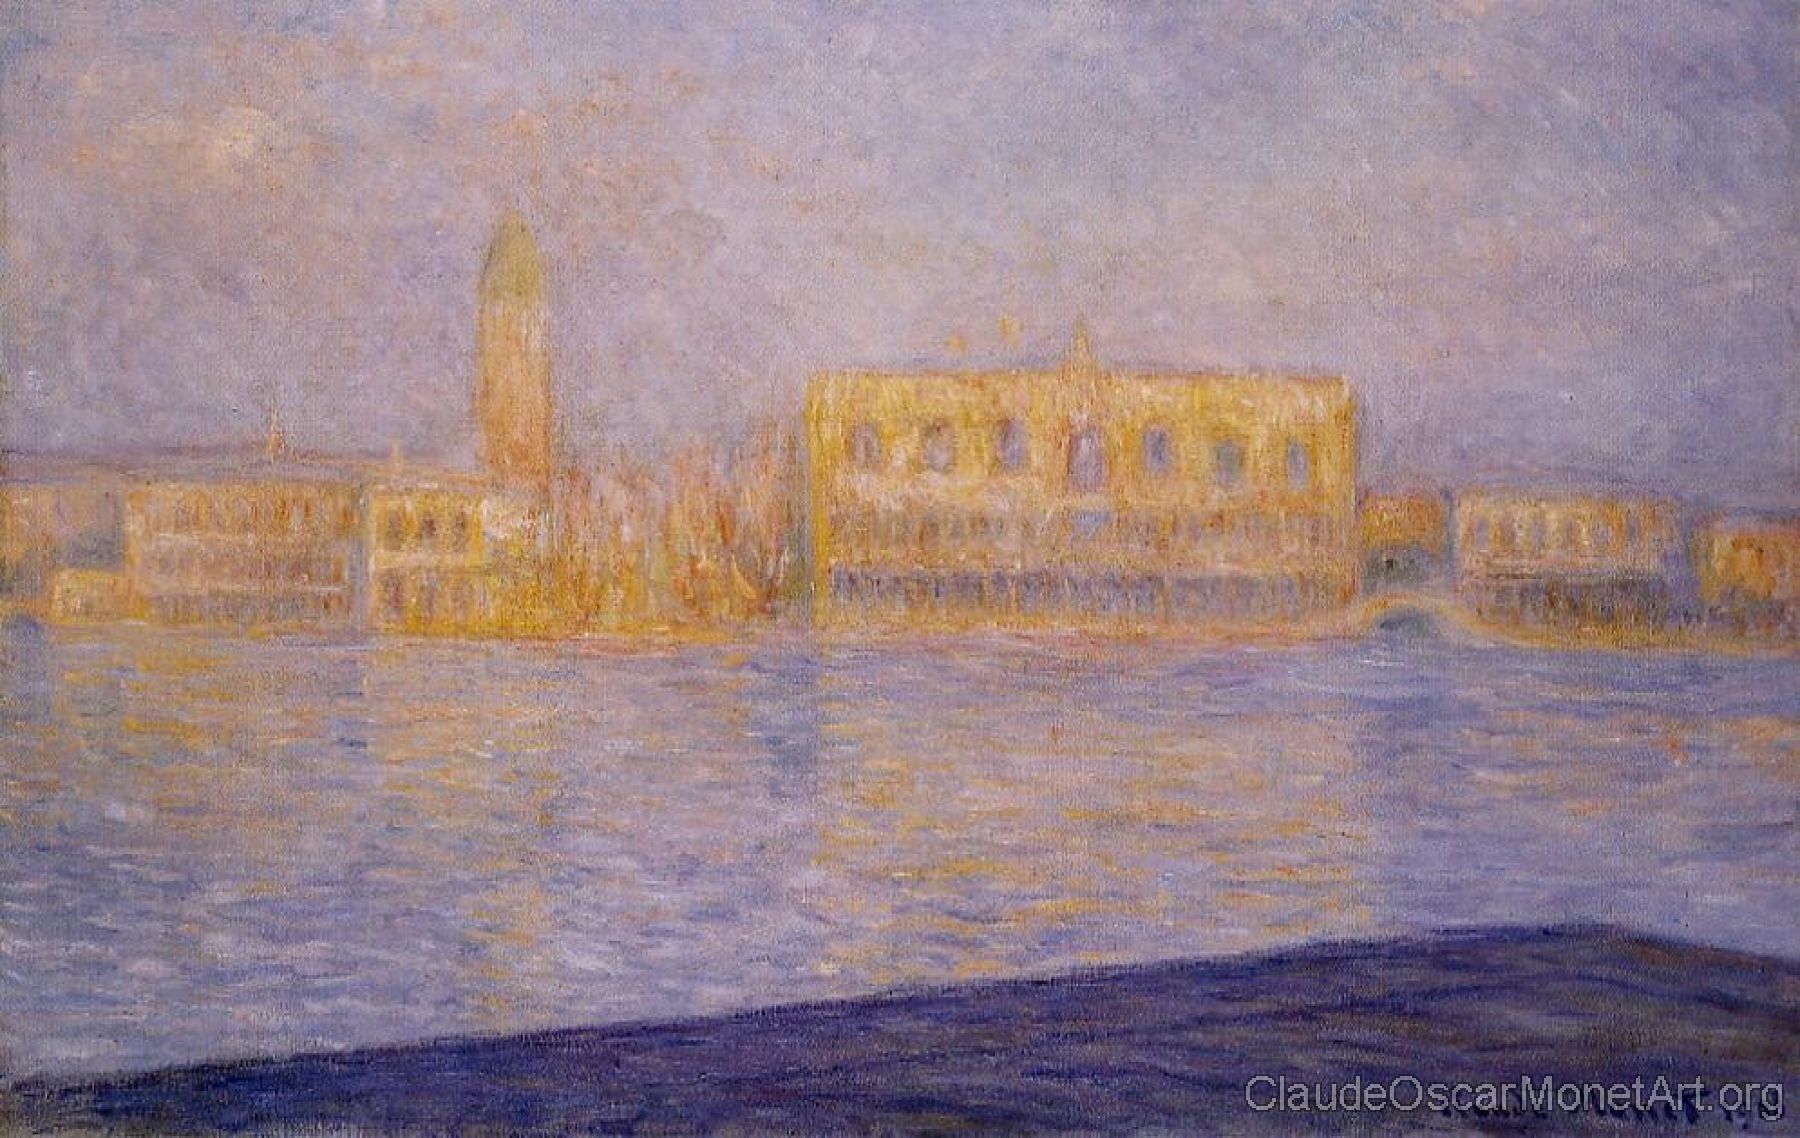 The Doges' Palace Seen from San Giorgio Maggiore